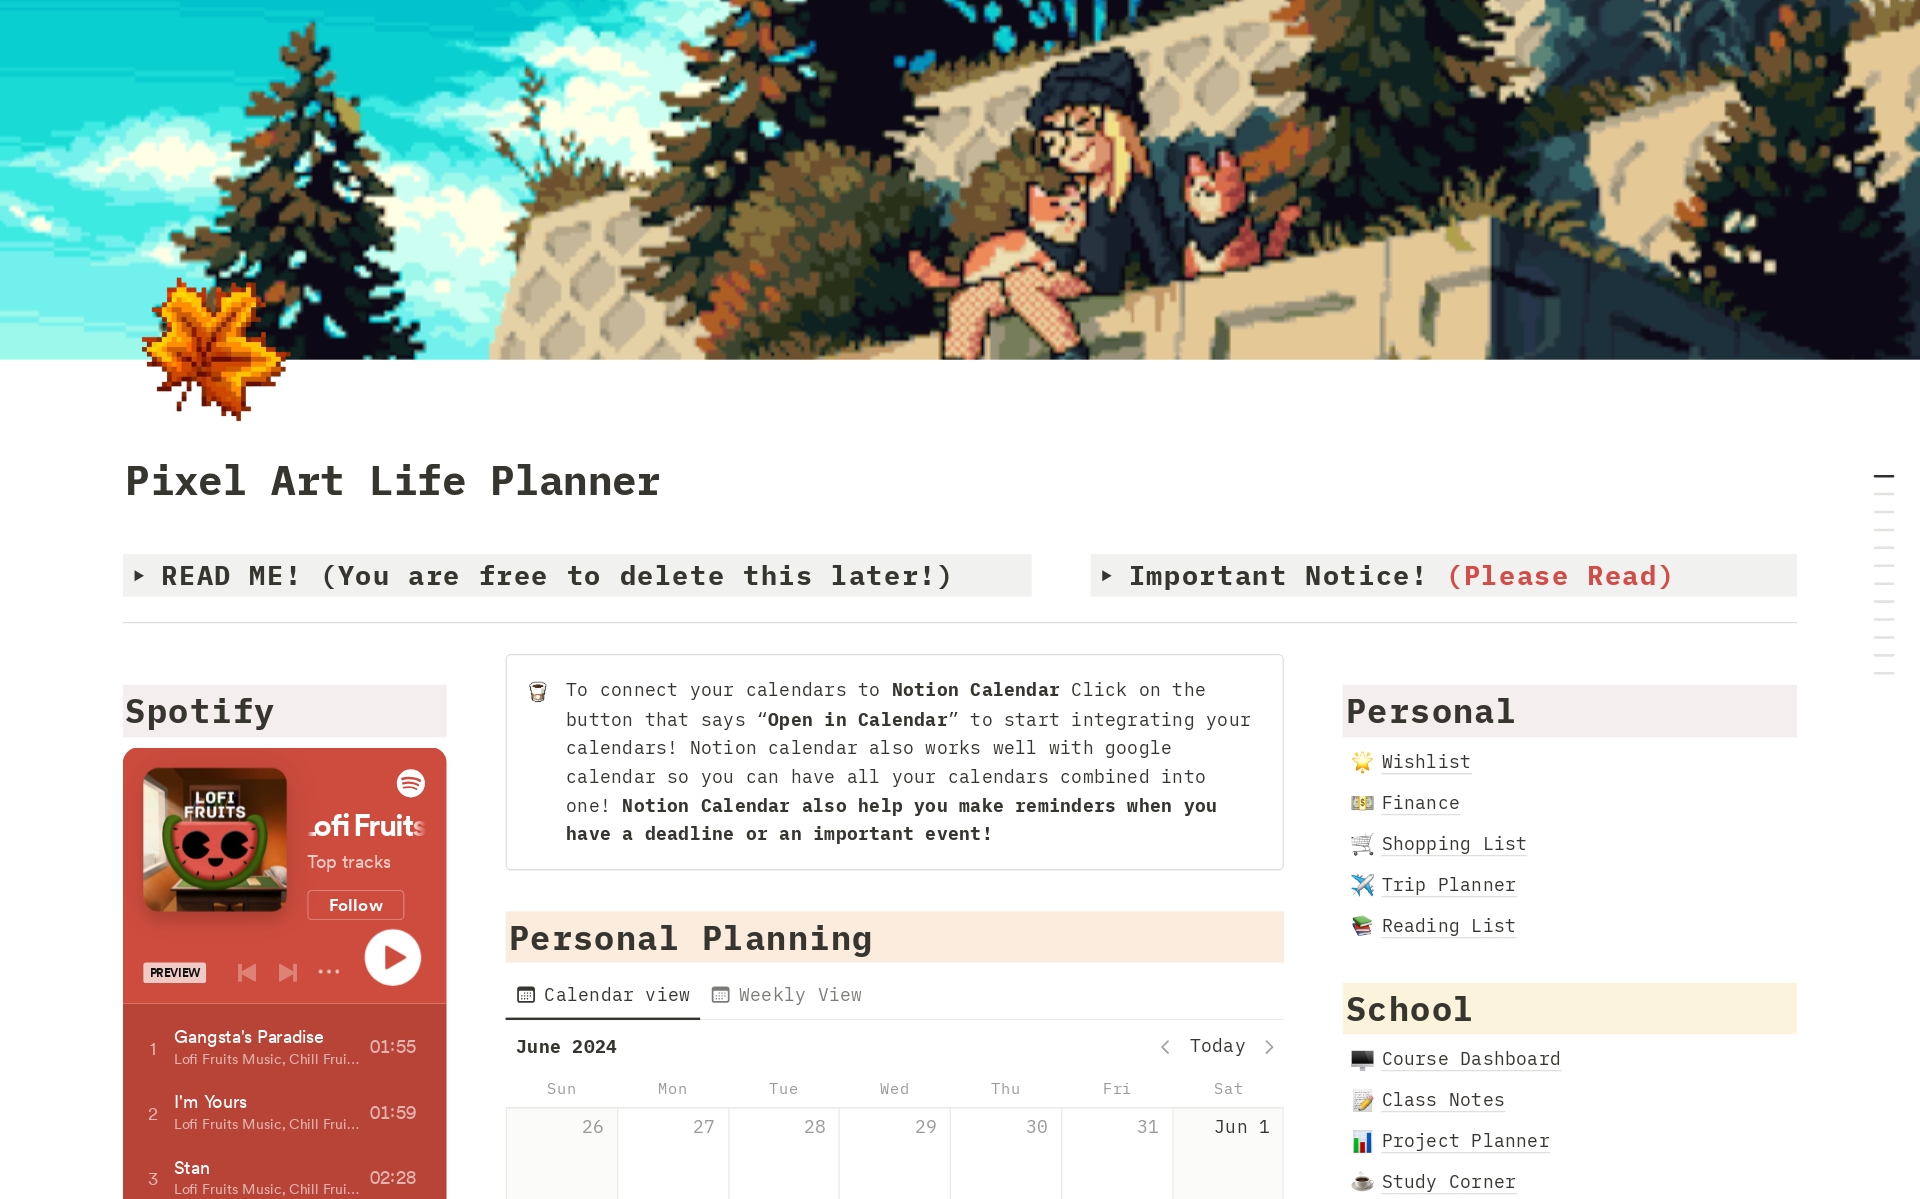 Pixel Art Life Planner – a vibrant, animated template to boost organization and creativity. Features include a wishlist, finance manager, shopping list, trip planner, reading list, course dashboard, project planner, skincare tracker, nutrition, fitness, and mental health tools.